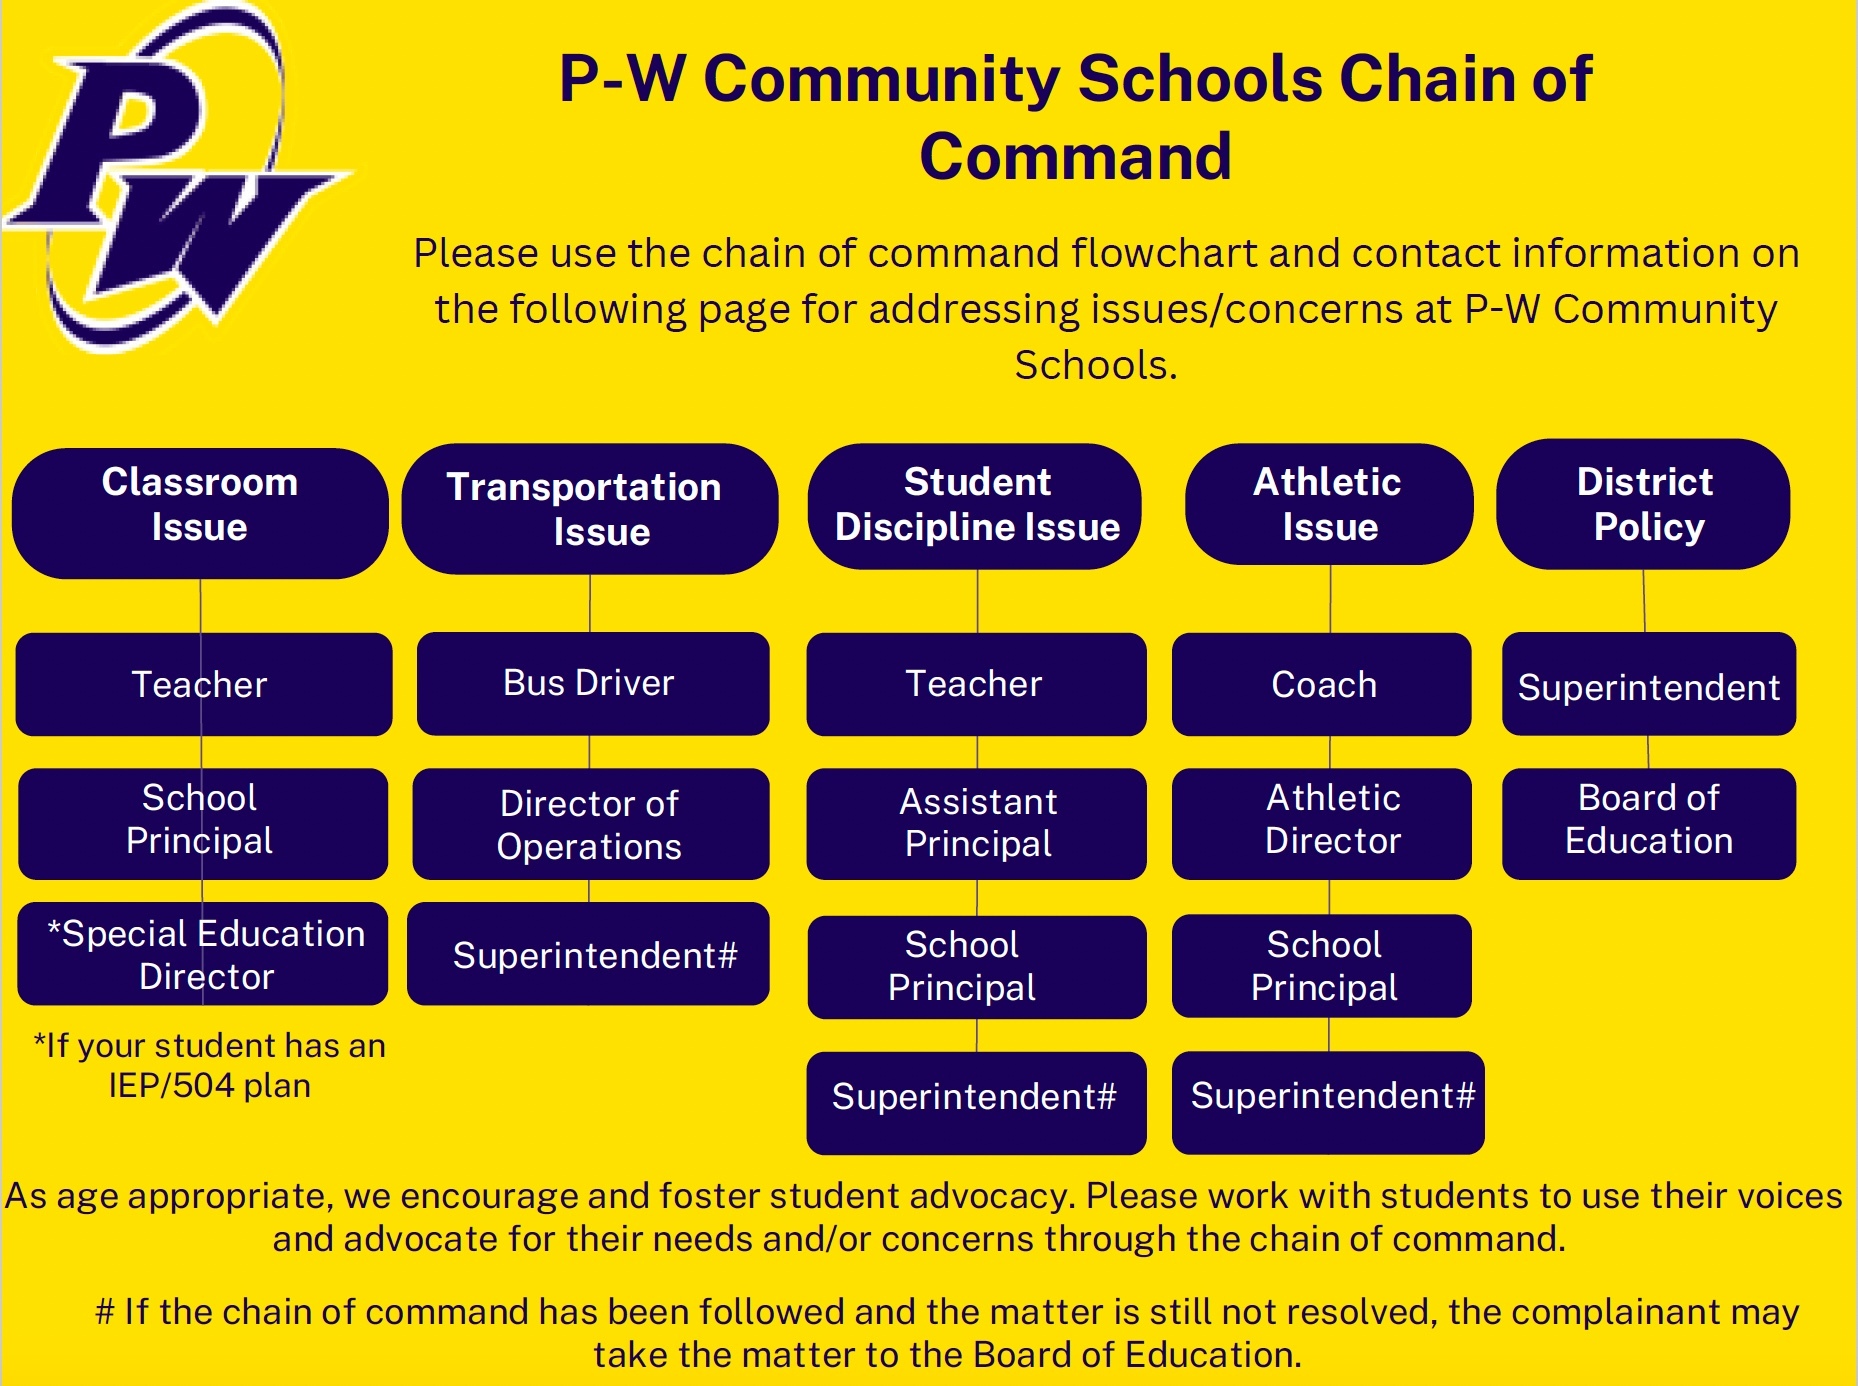 Blue and gold flow chart indicating the chain of command at P-W Community Schools